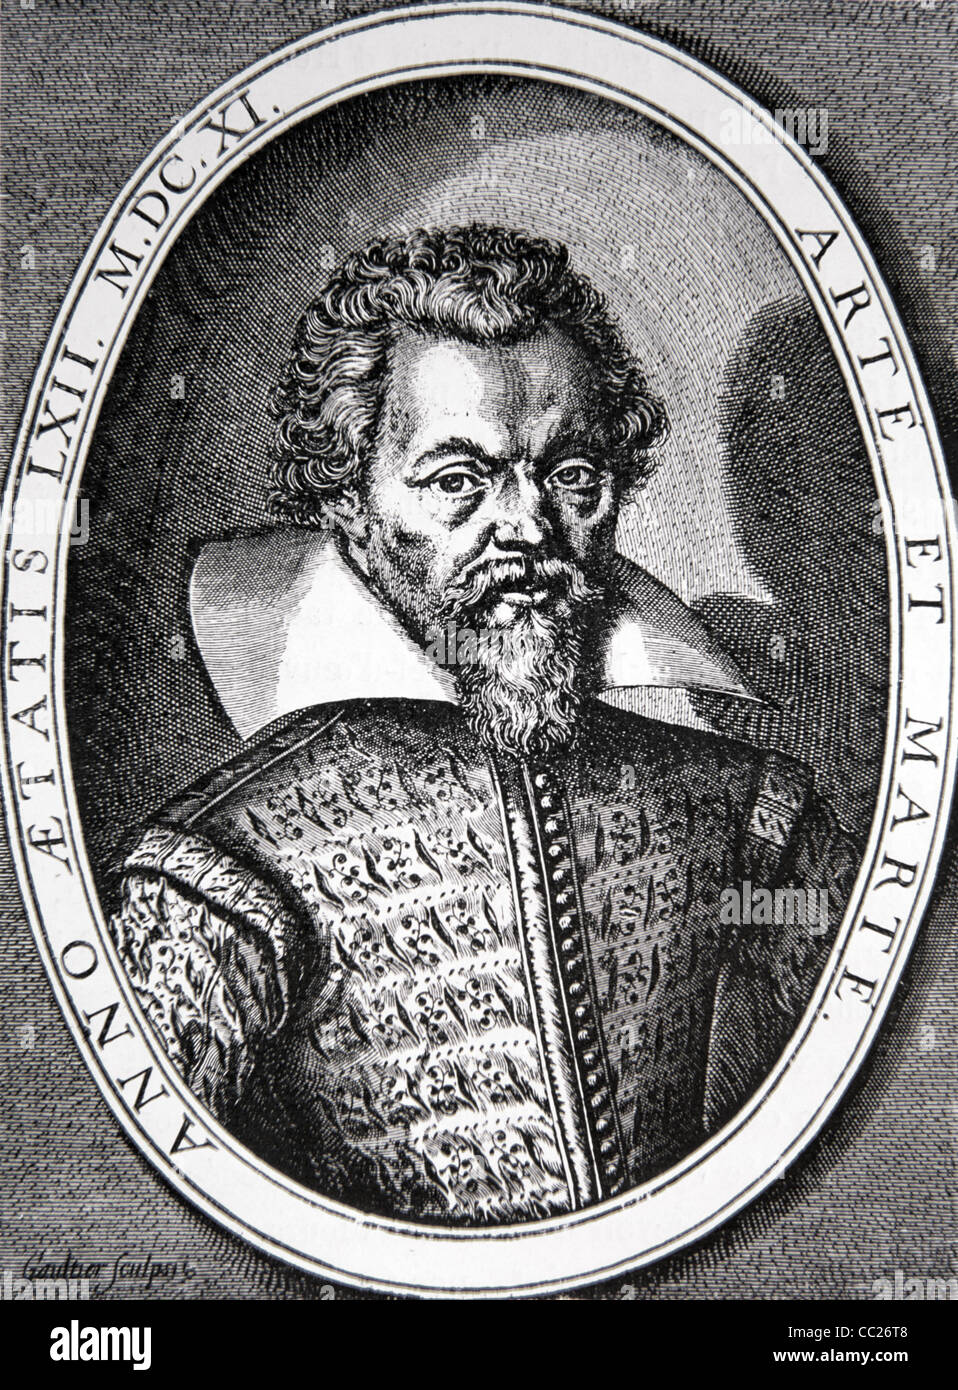 Portrait of Philippe de Mornay, Du-Plessis-Mornay or Mornay du Plessis (1549-1623) French Huguenot Theorist & Monarchomach. Engraving 1611. Stock Photo